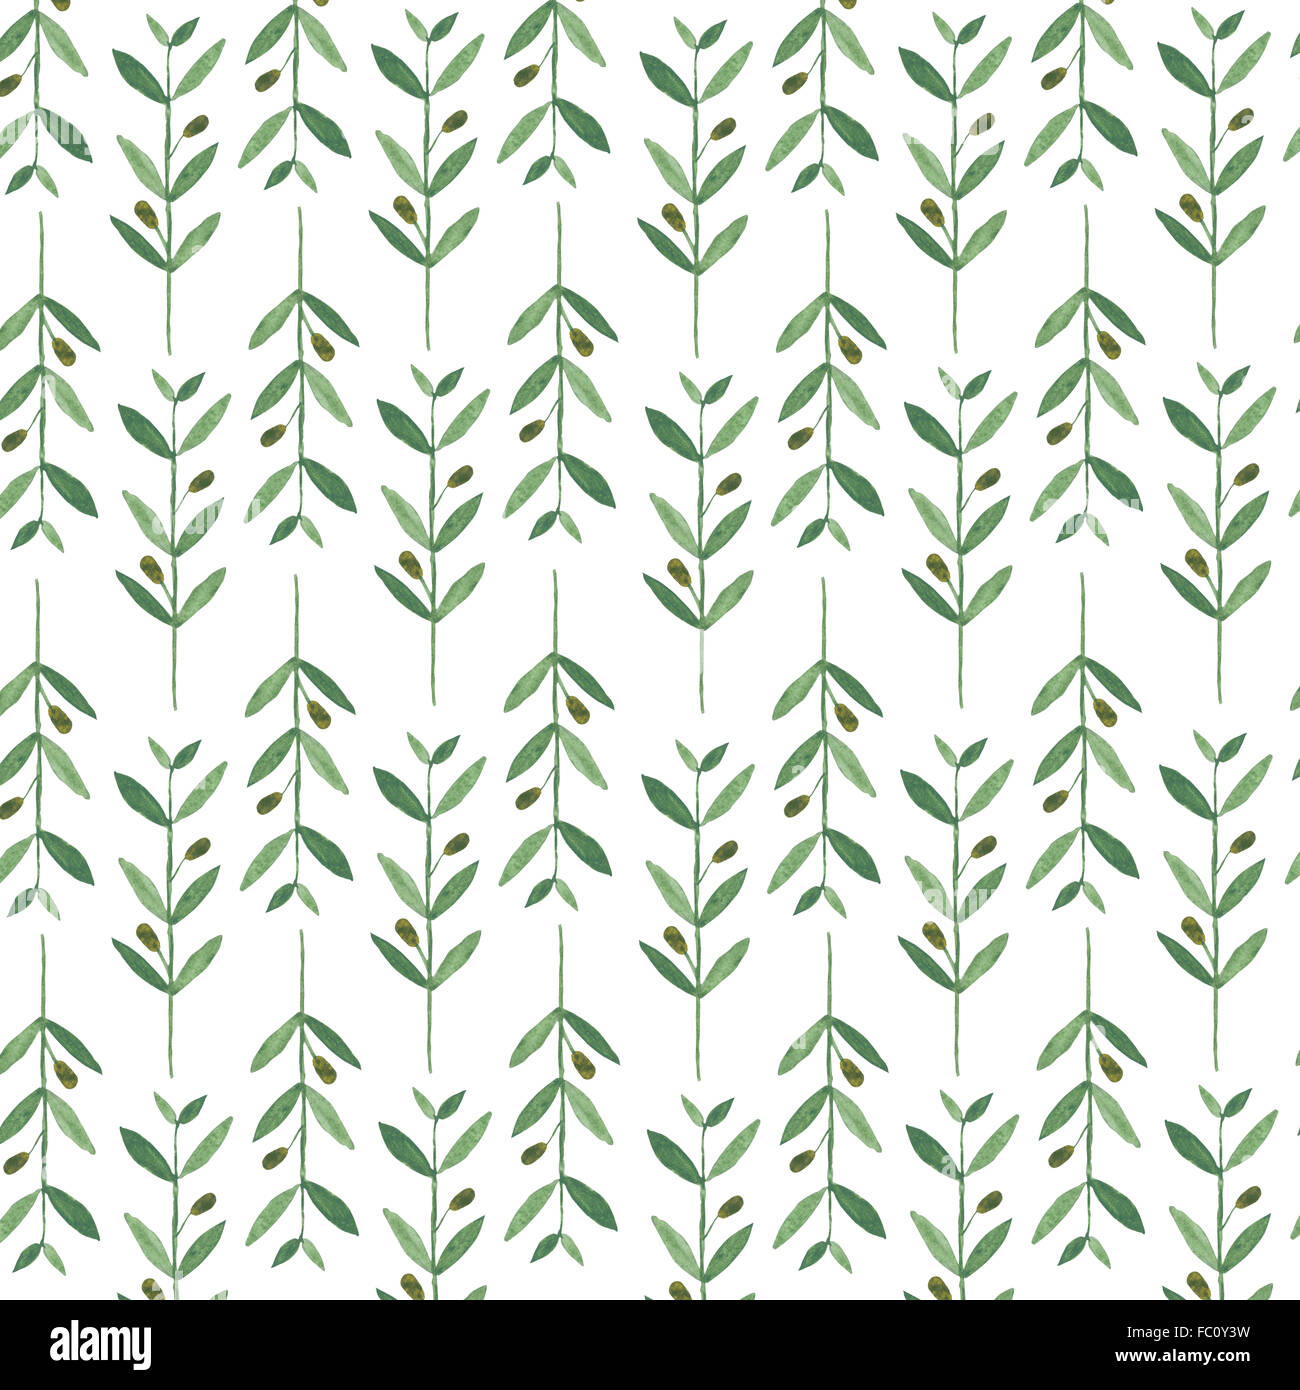 Watercolor pattern with olive branches. Illustration on white background. Nature and Organic concept. Natural product. Stock Photo